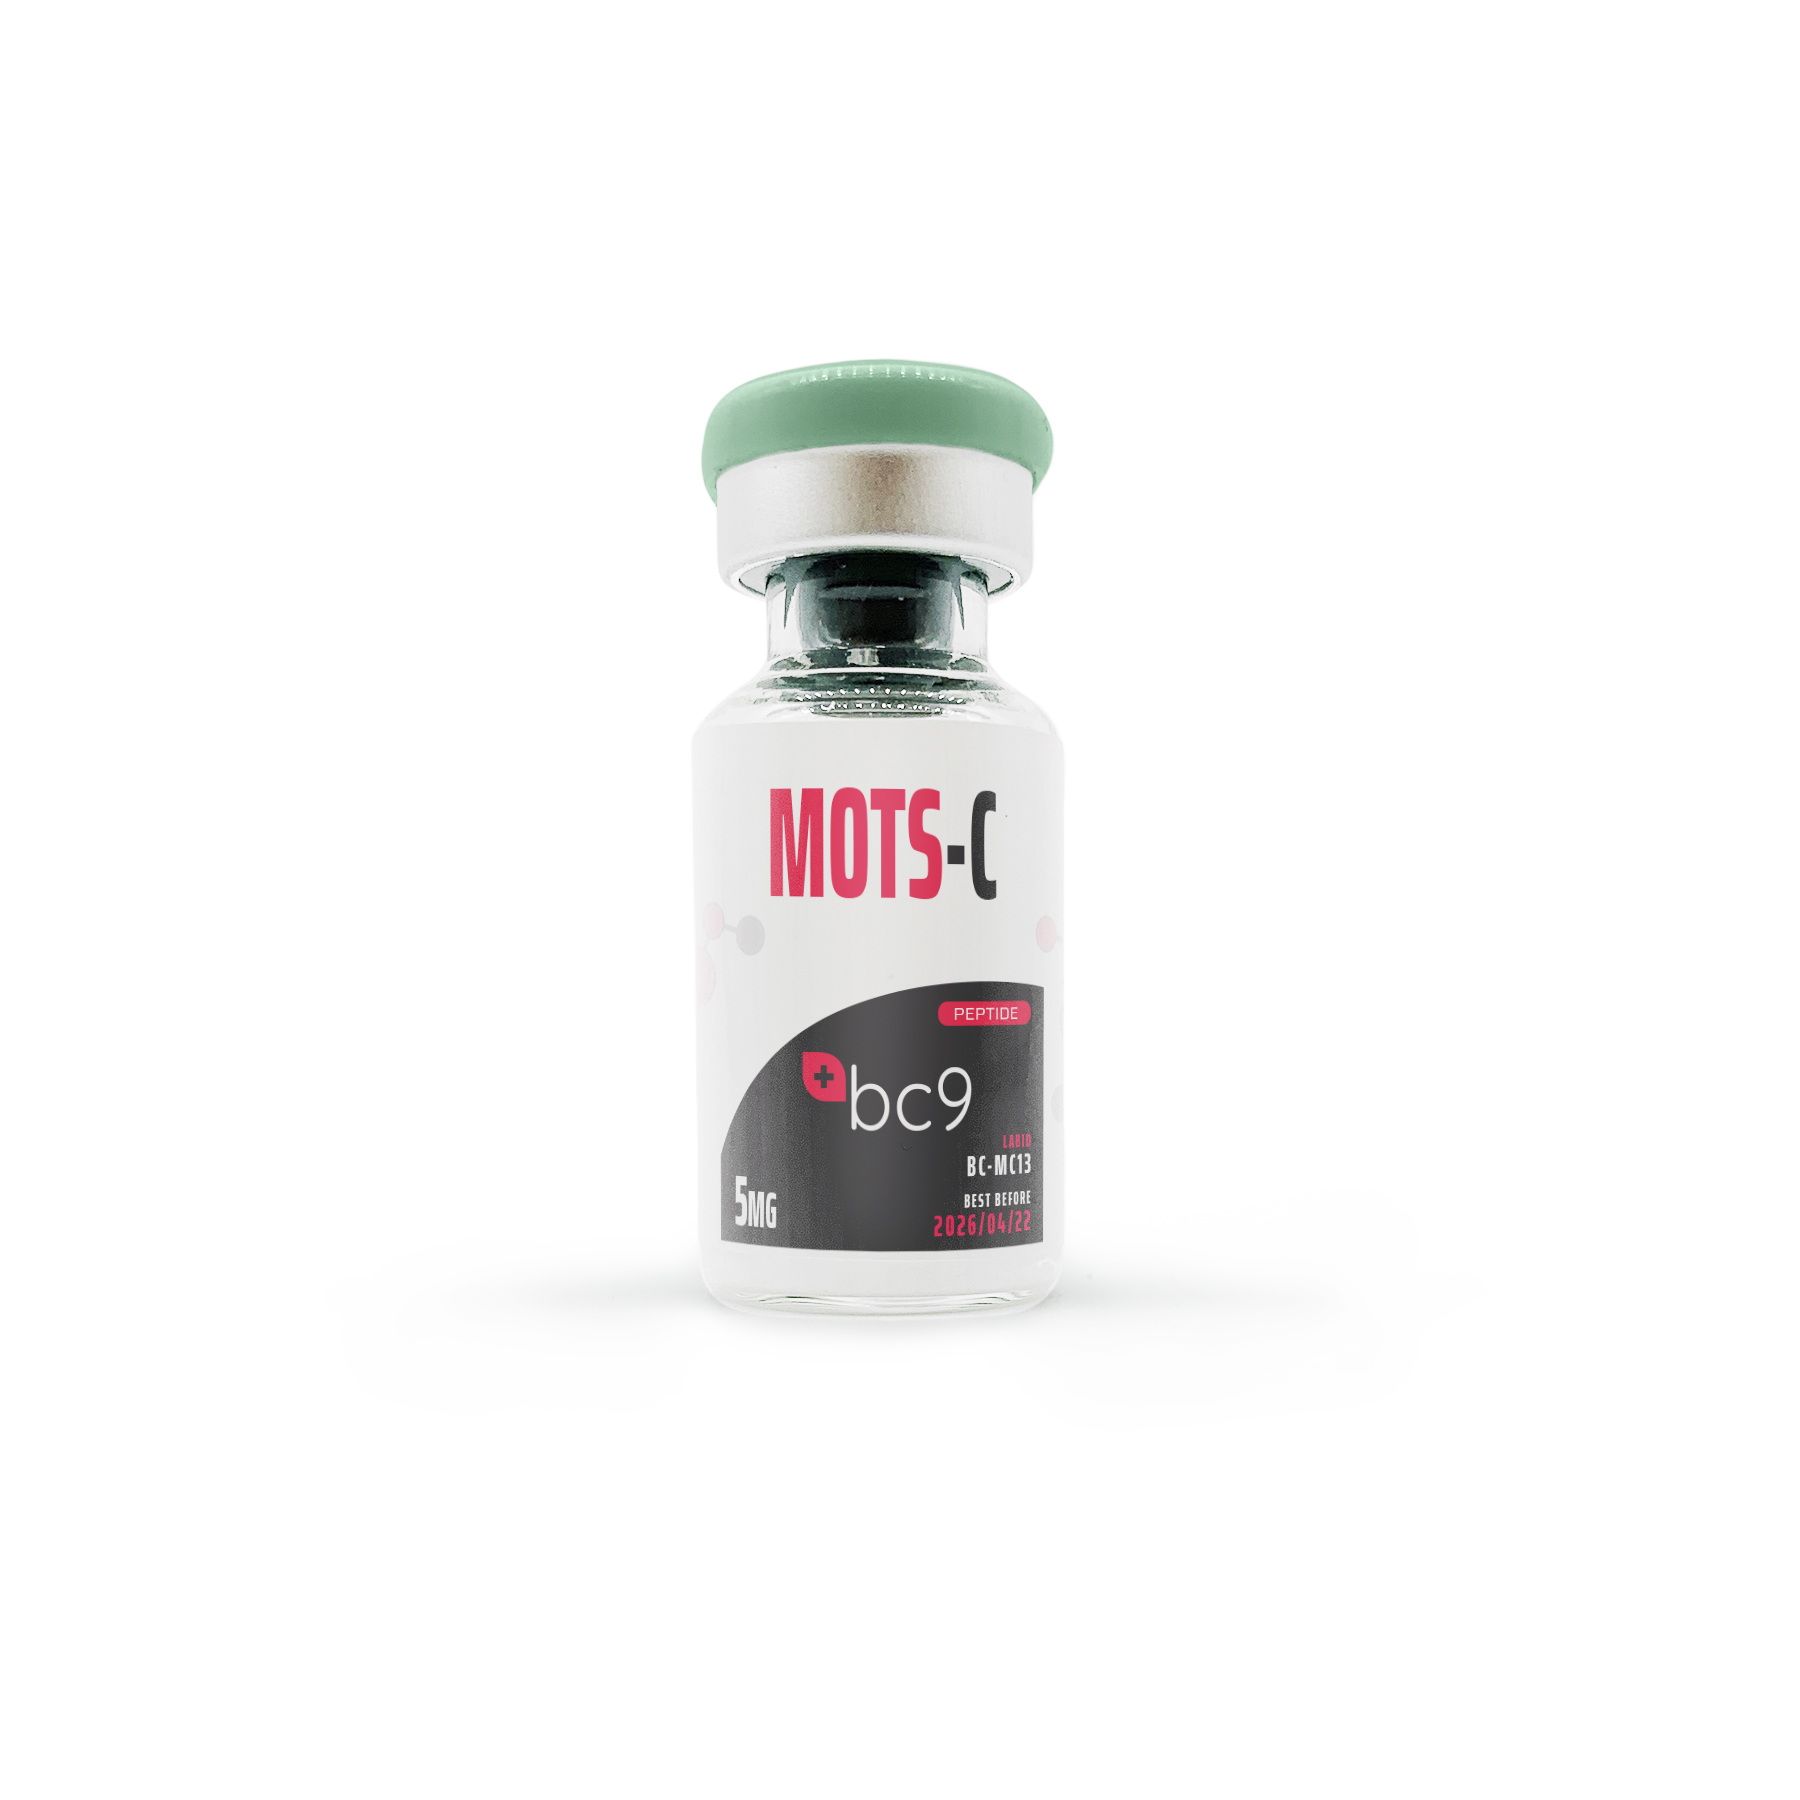 MOTS-c Peptide for Sale | Fast Shipping | BC9.org